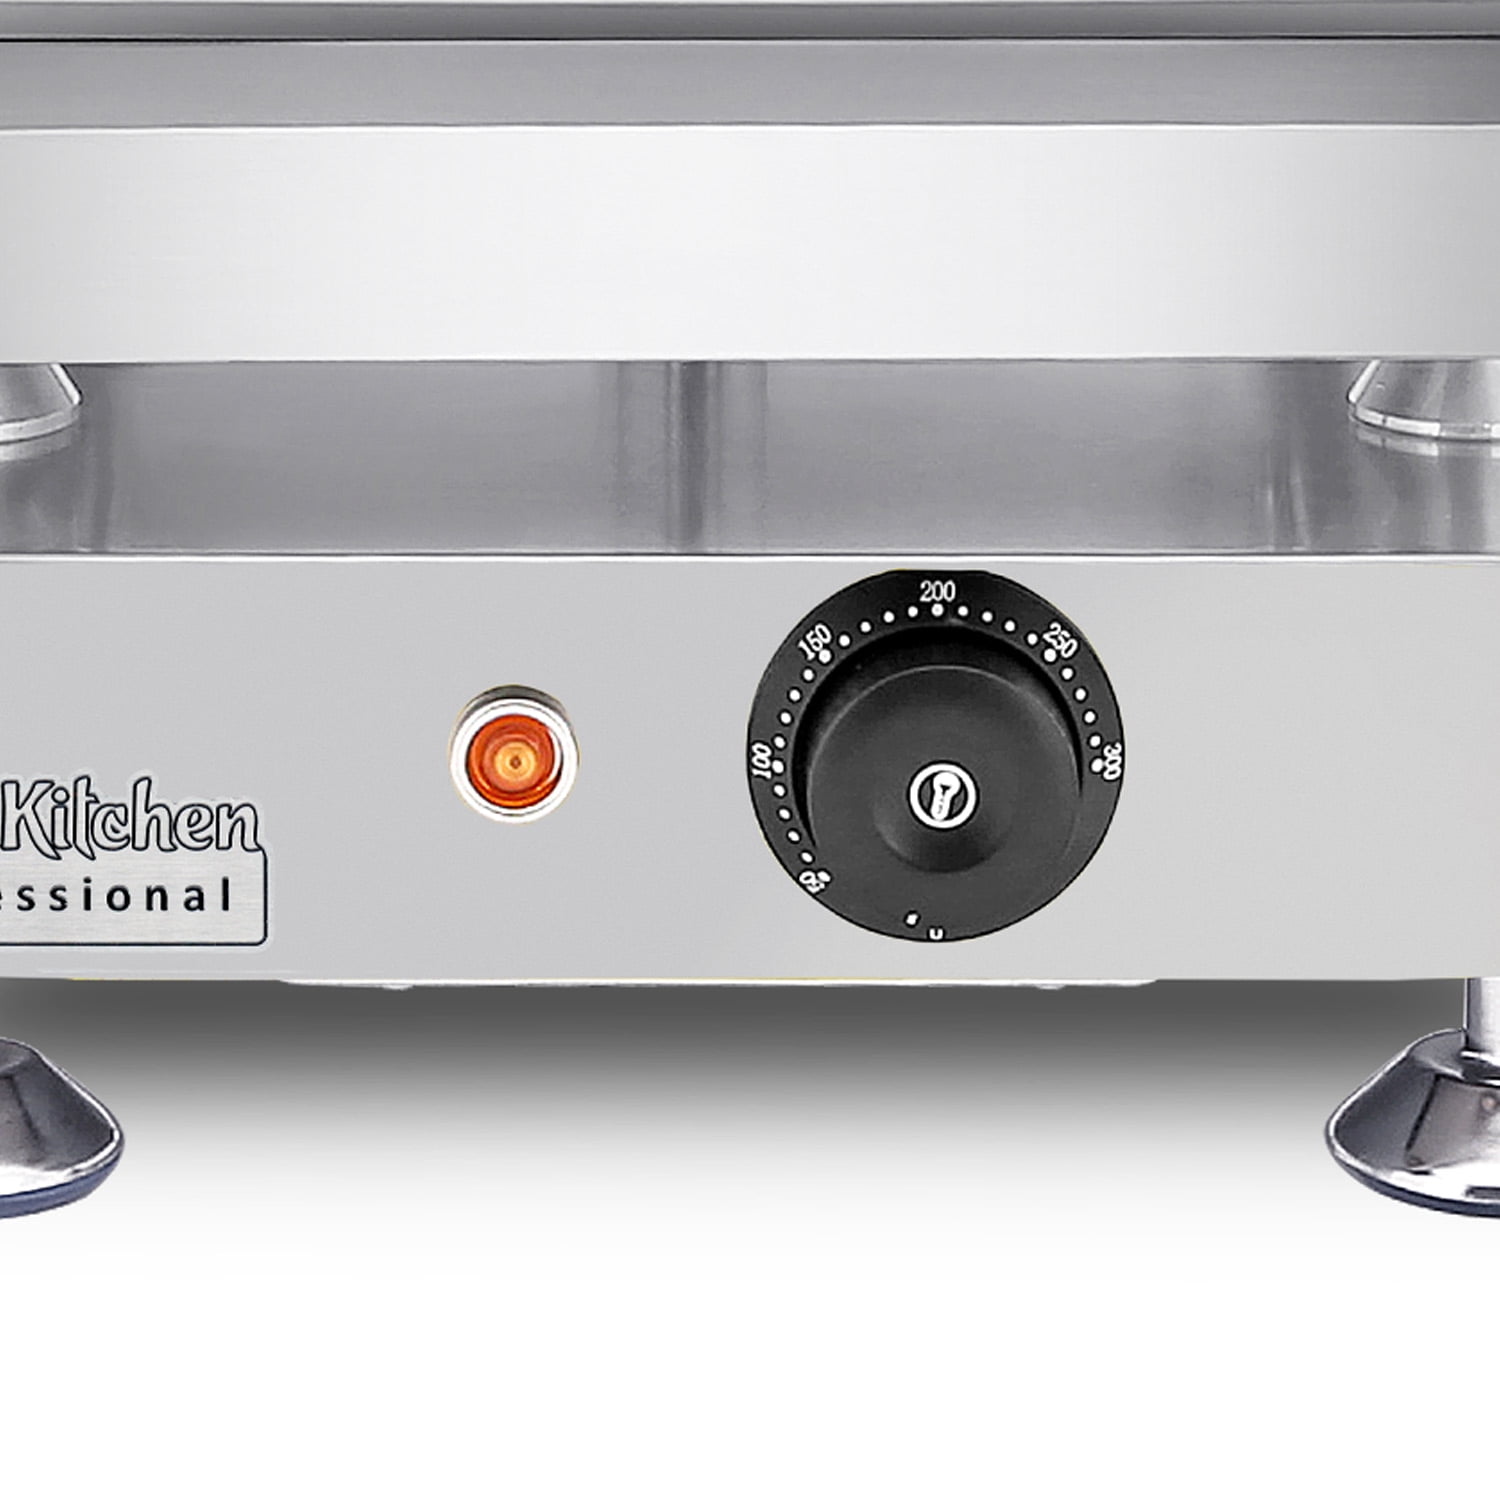 ALDKitchen Flat Top Griddle | Teppanyaki Grill | Single, Dual or Triple  Thermostat | Commercial Use | 110V (Small)